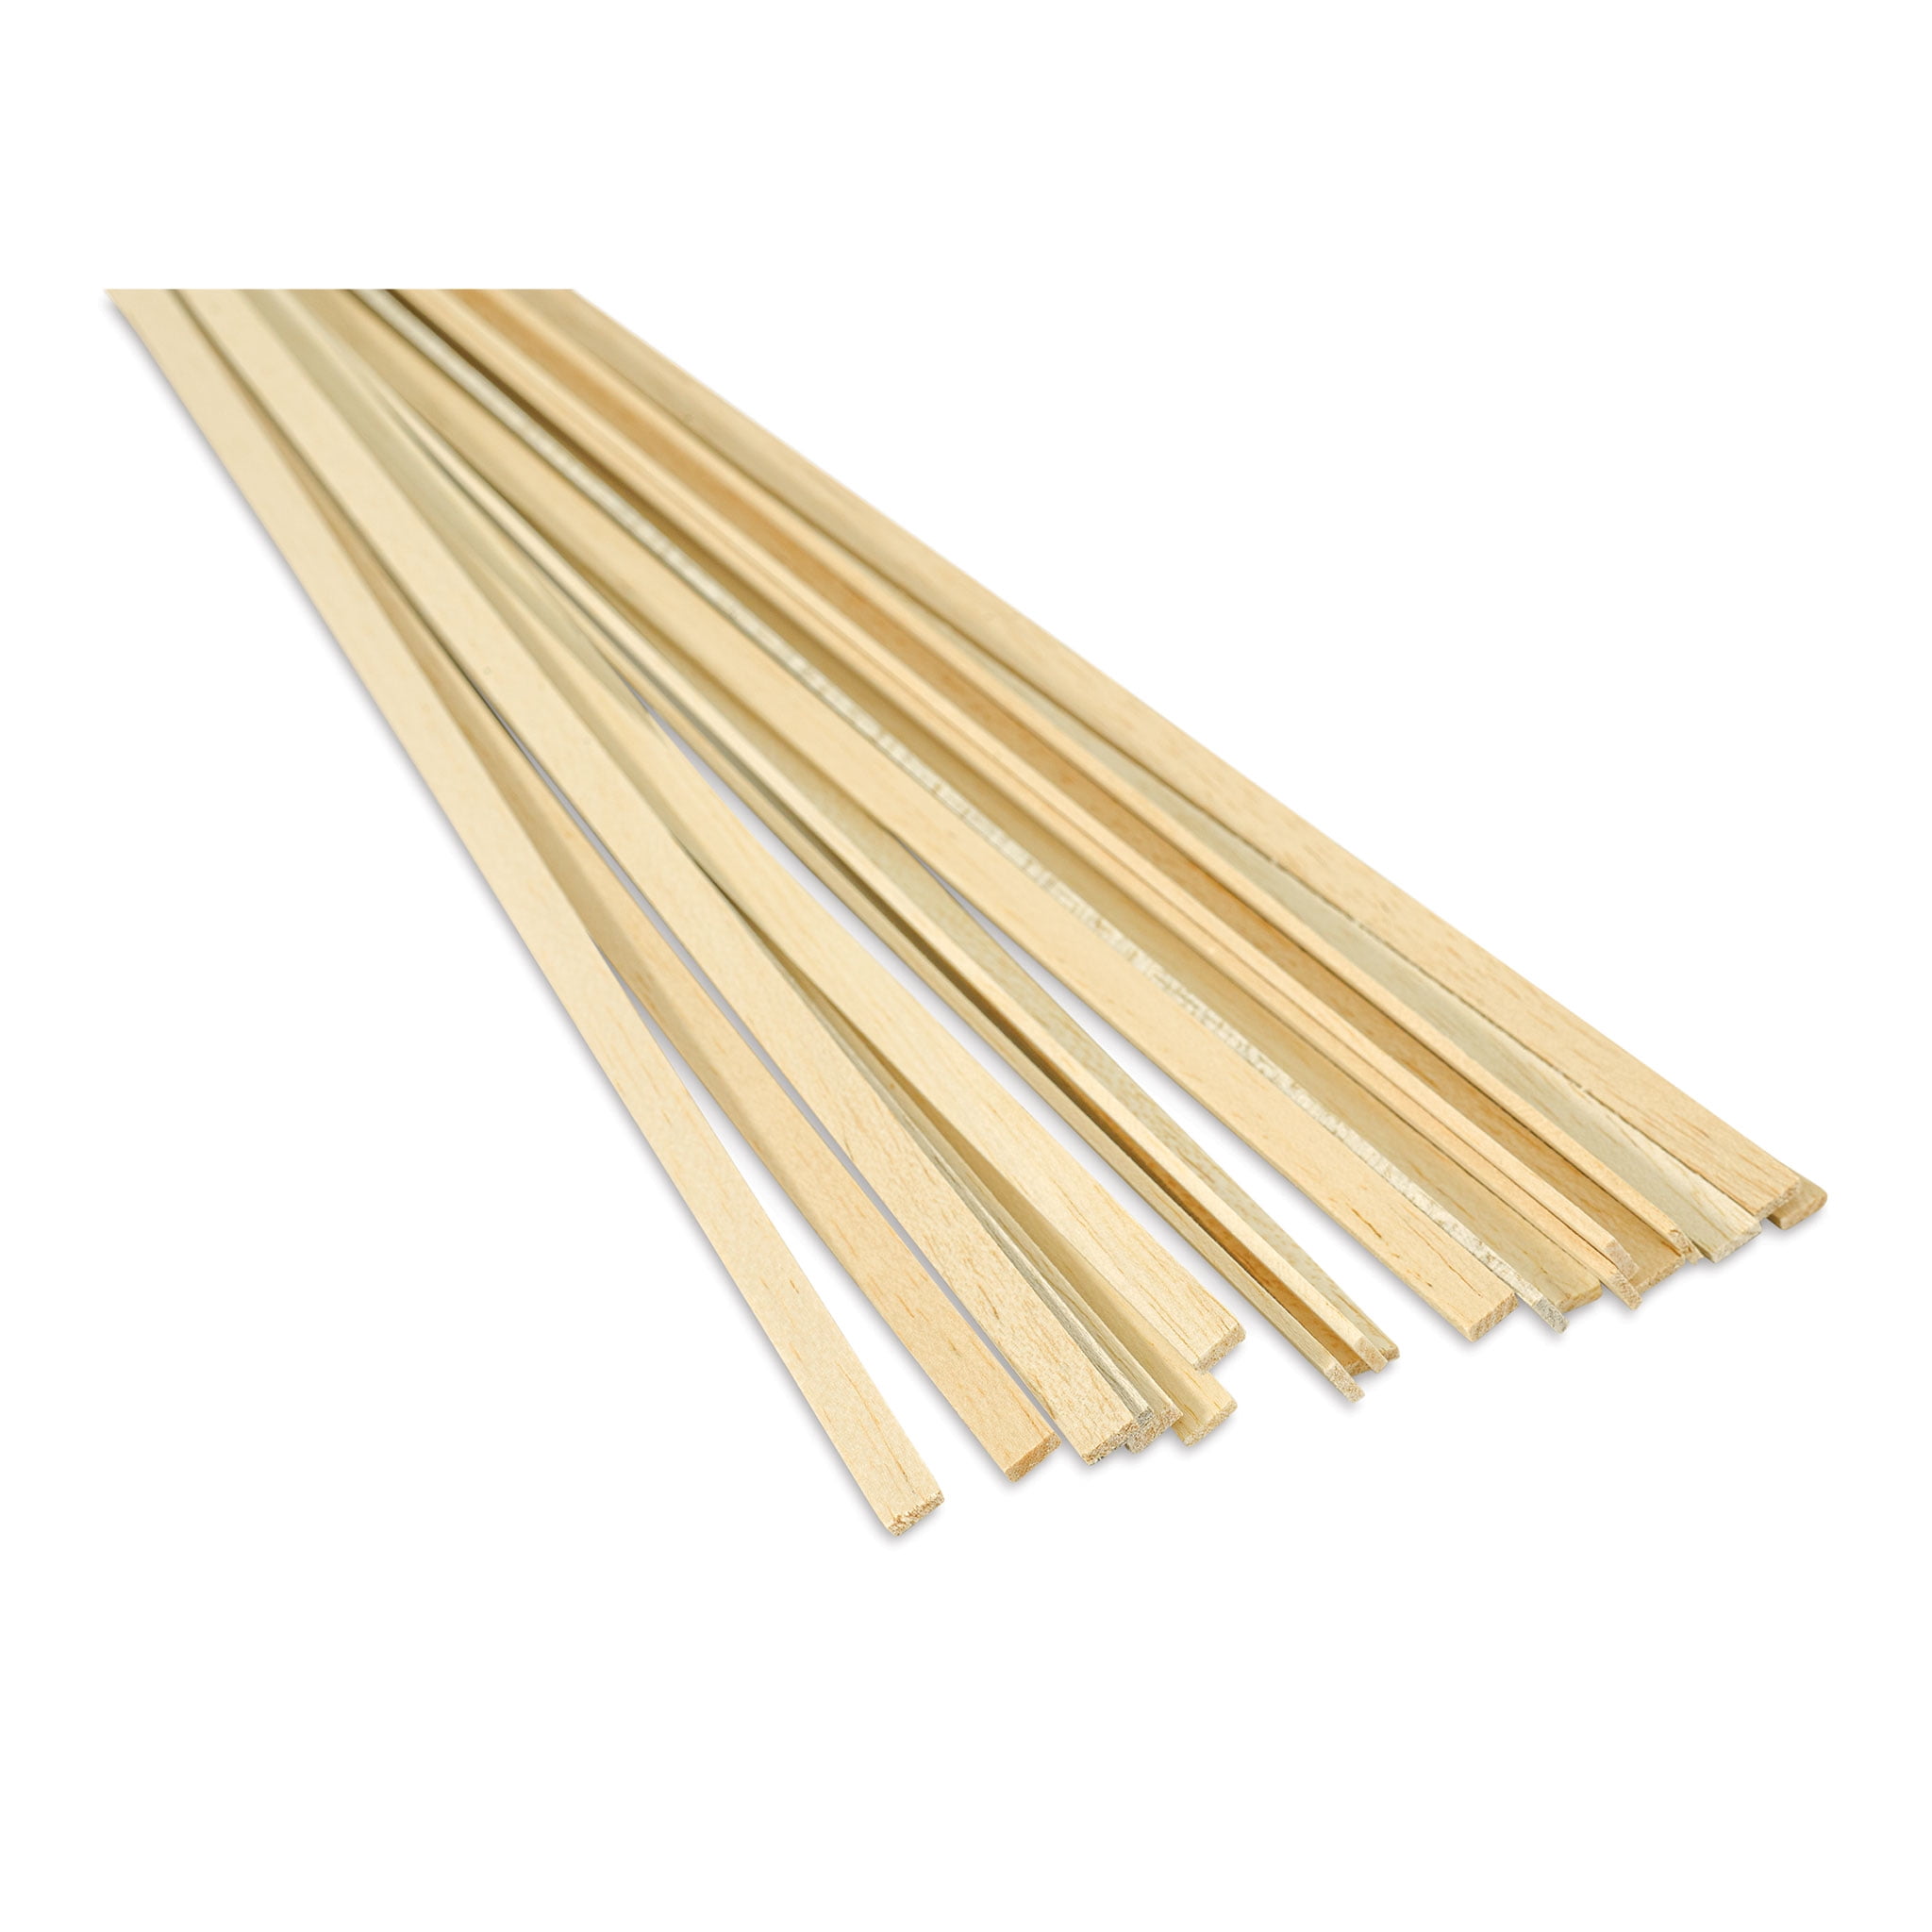  Homaisson 222 Pieces Balsa Wood Strips 12 Inches Of 3 Sizes